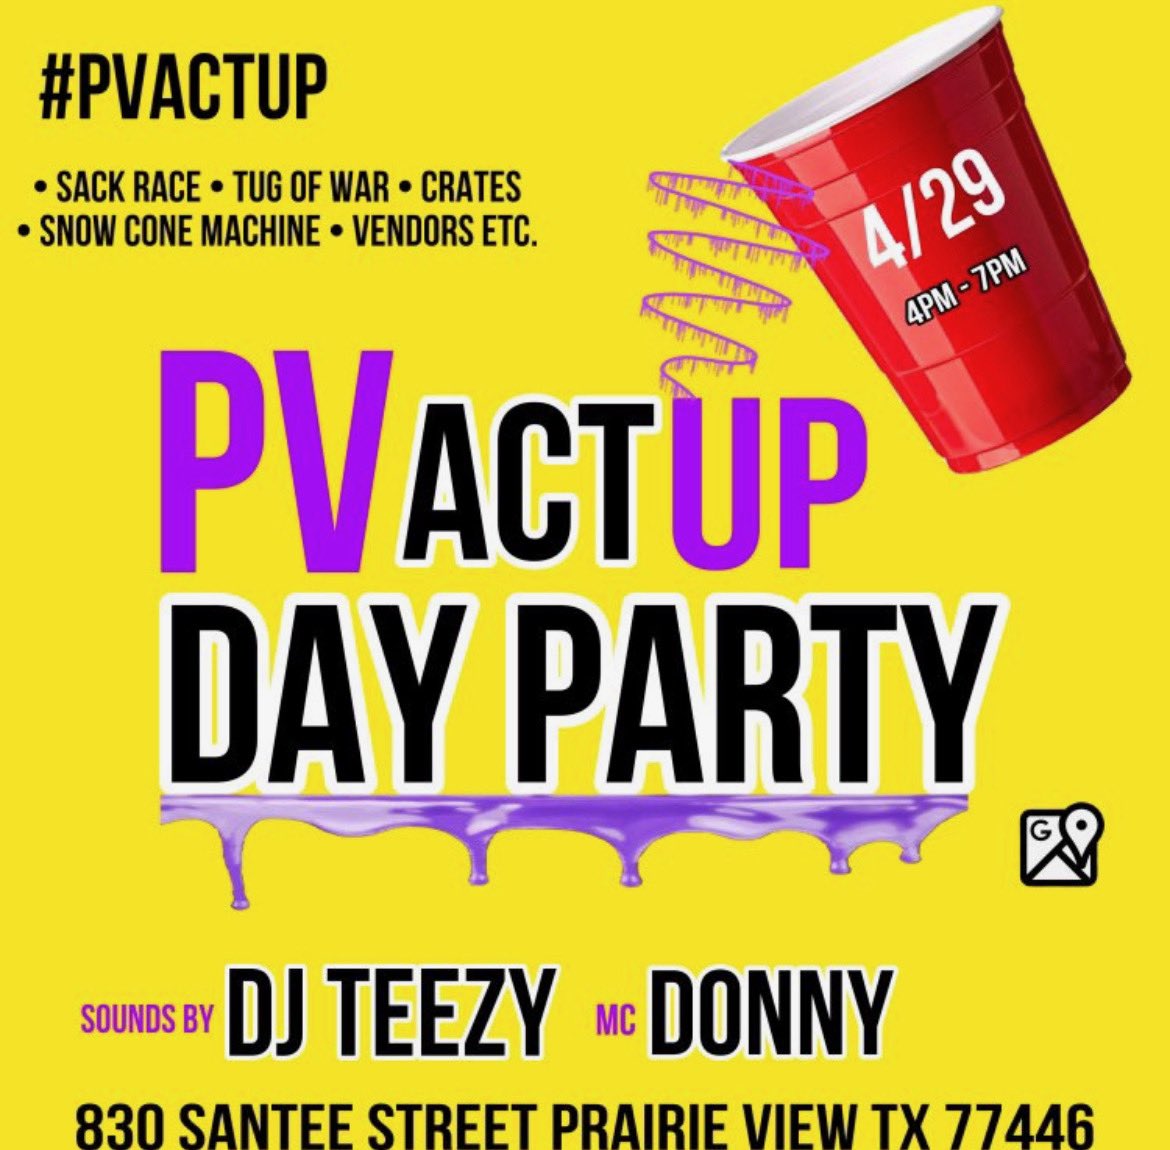 🚨04•29•2023🚨 
We going up !!! NO PLAY PLAY ‼️
Y’all know where to be, 2 parties in 1 🎬
Definitely gonna be a movie so don’t miss it 🎥 #PVActUp  #pvamu #shsu #SHSU26 #txsu #UoH